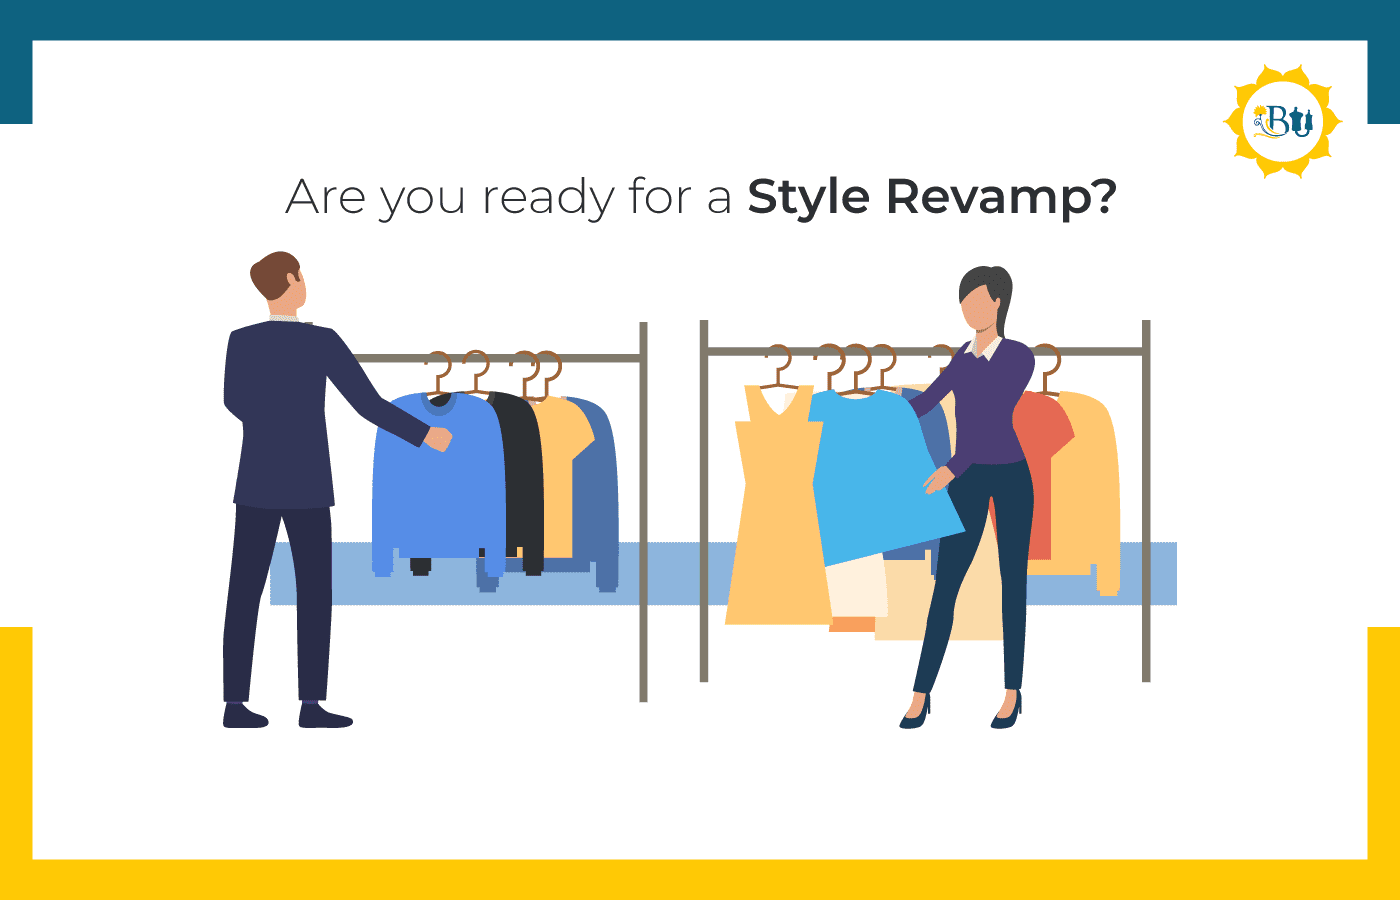 Are you ready for a Style Revamp?